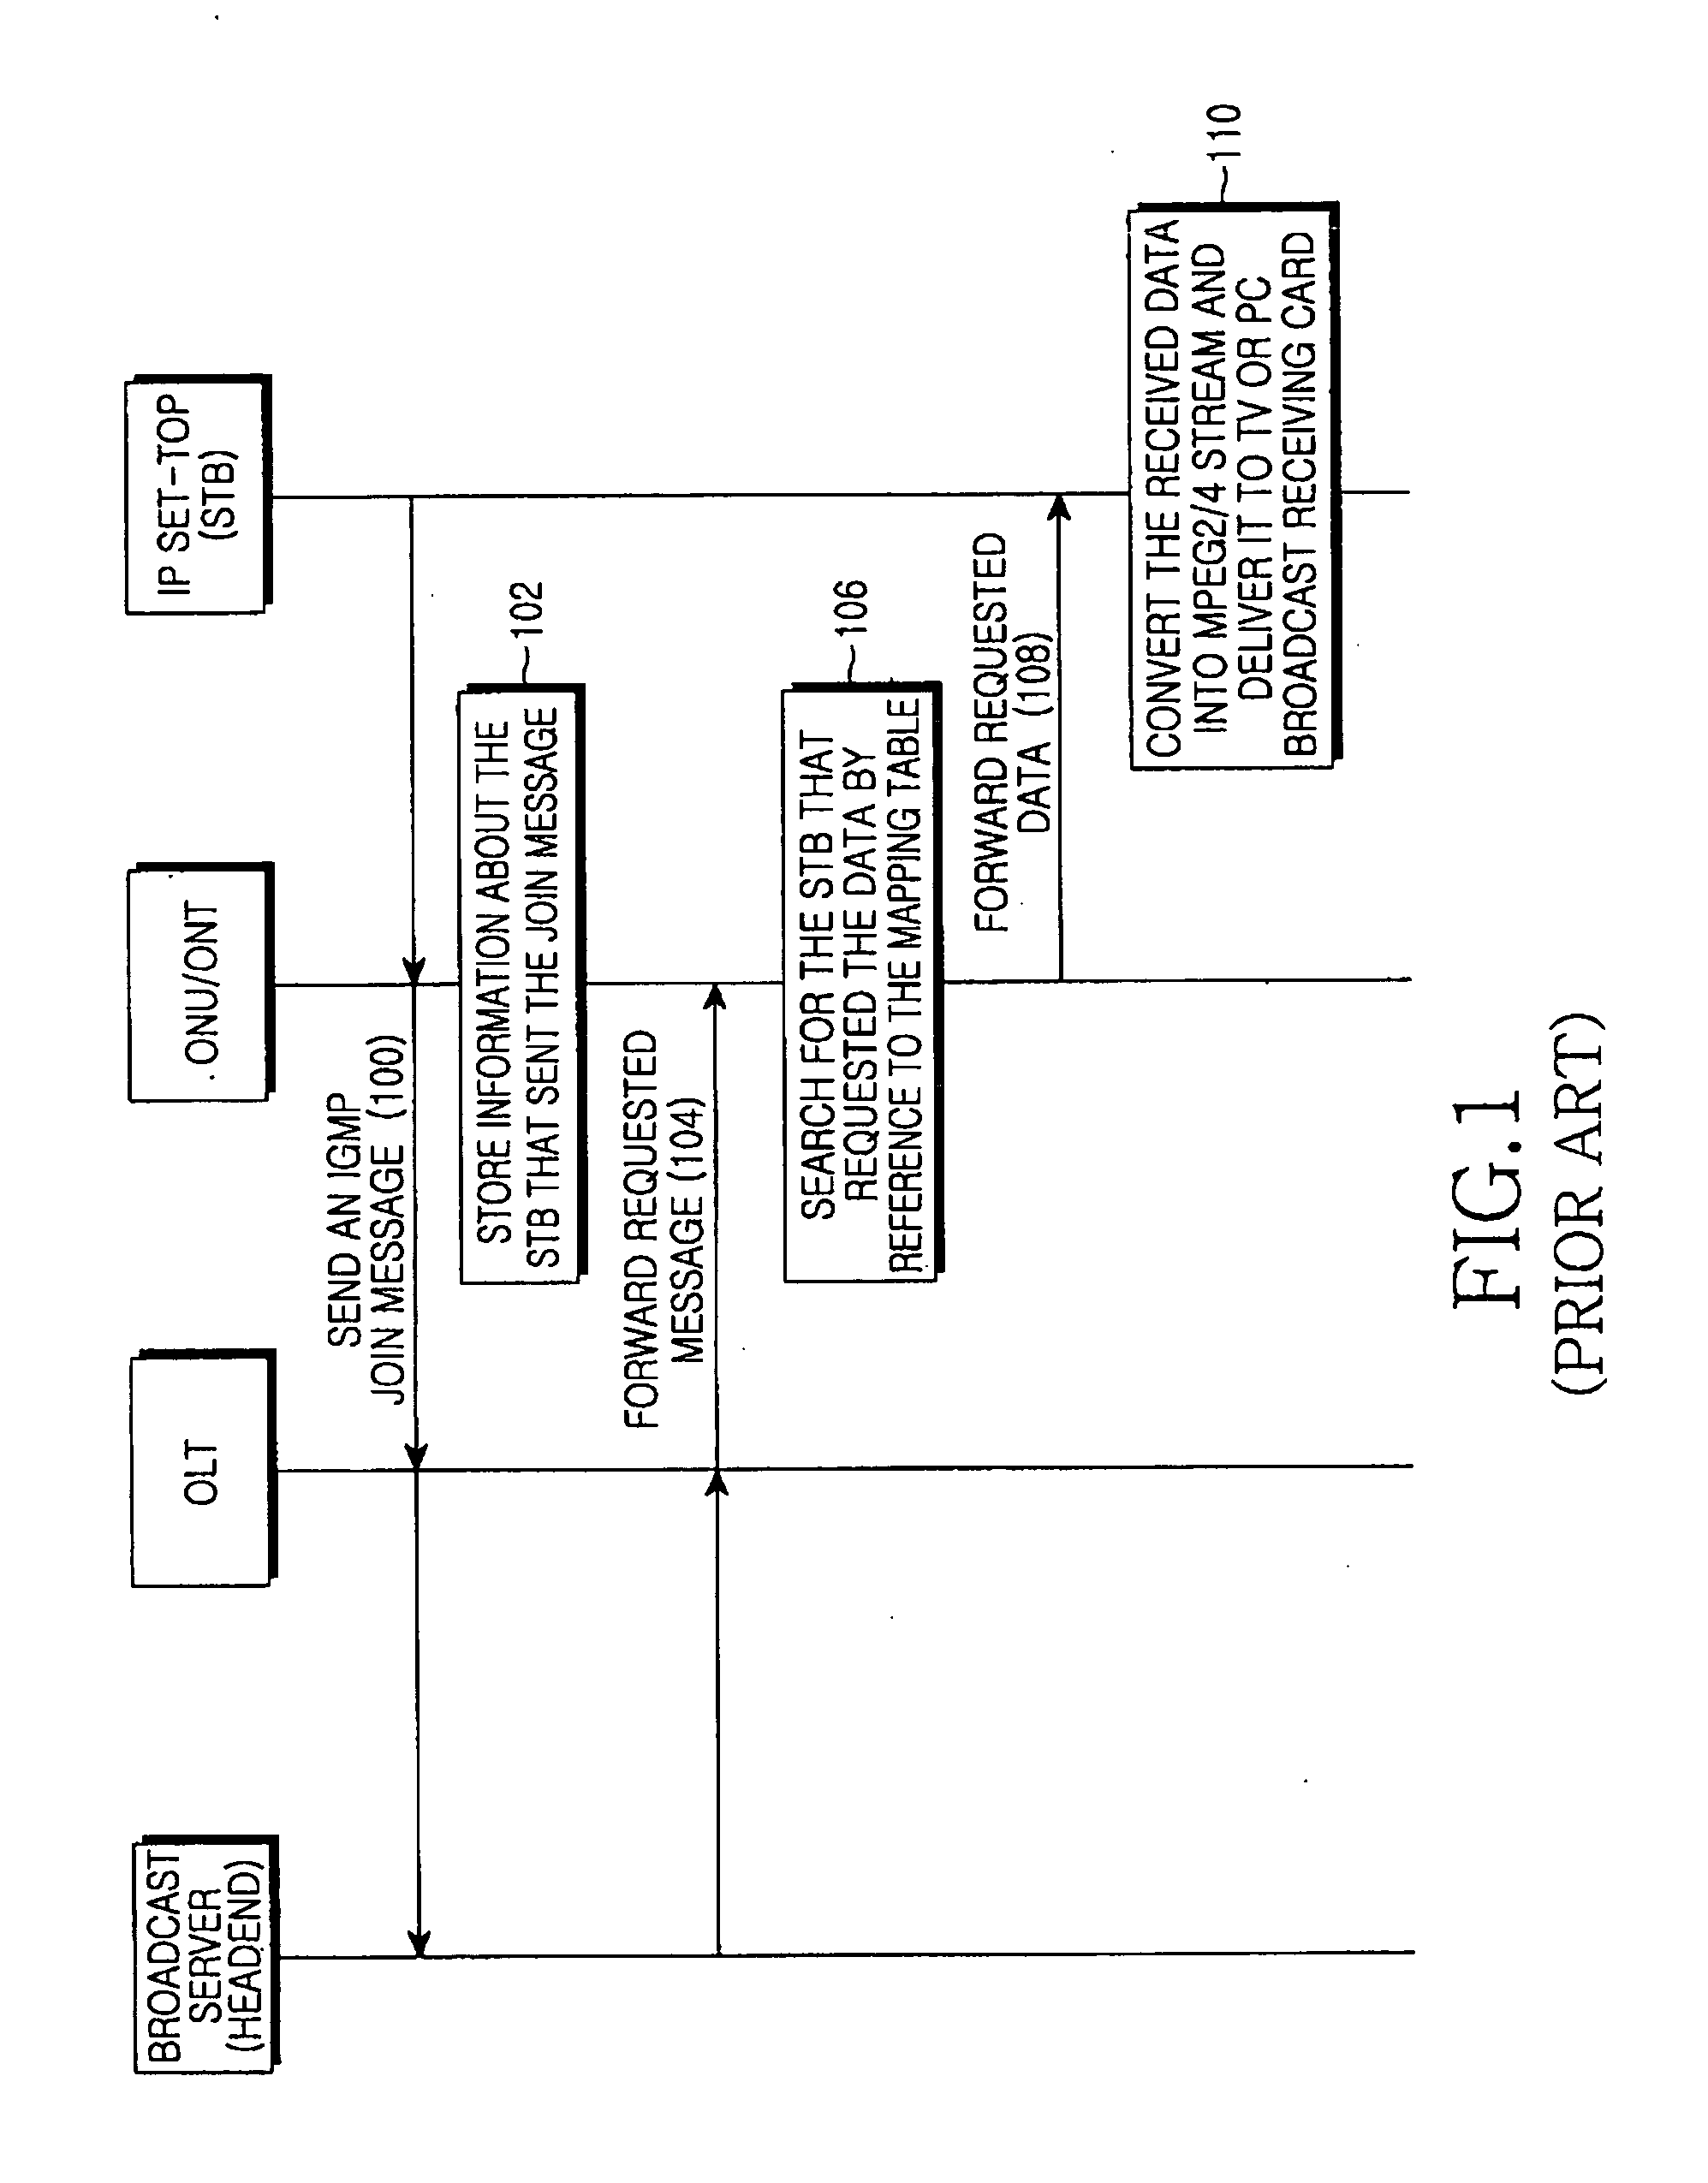 System and method for providing internet protocol based broadcast services